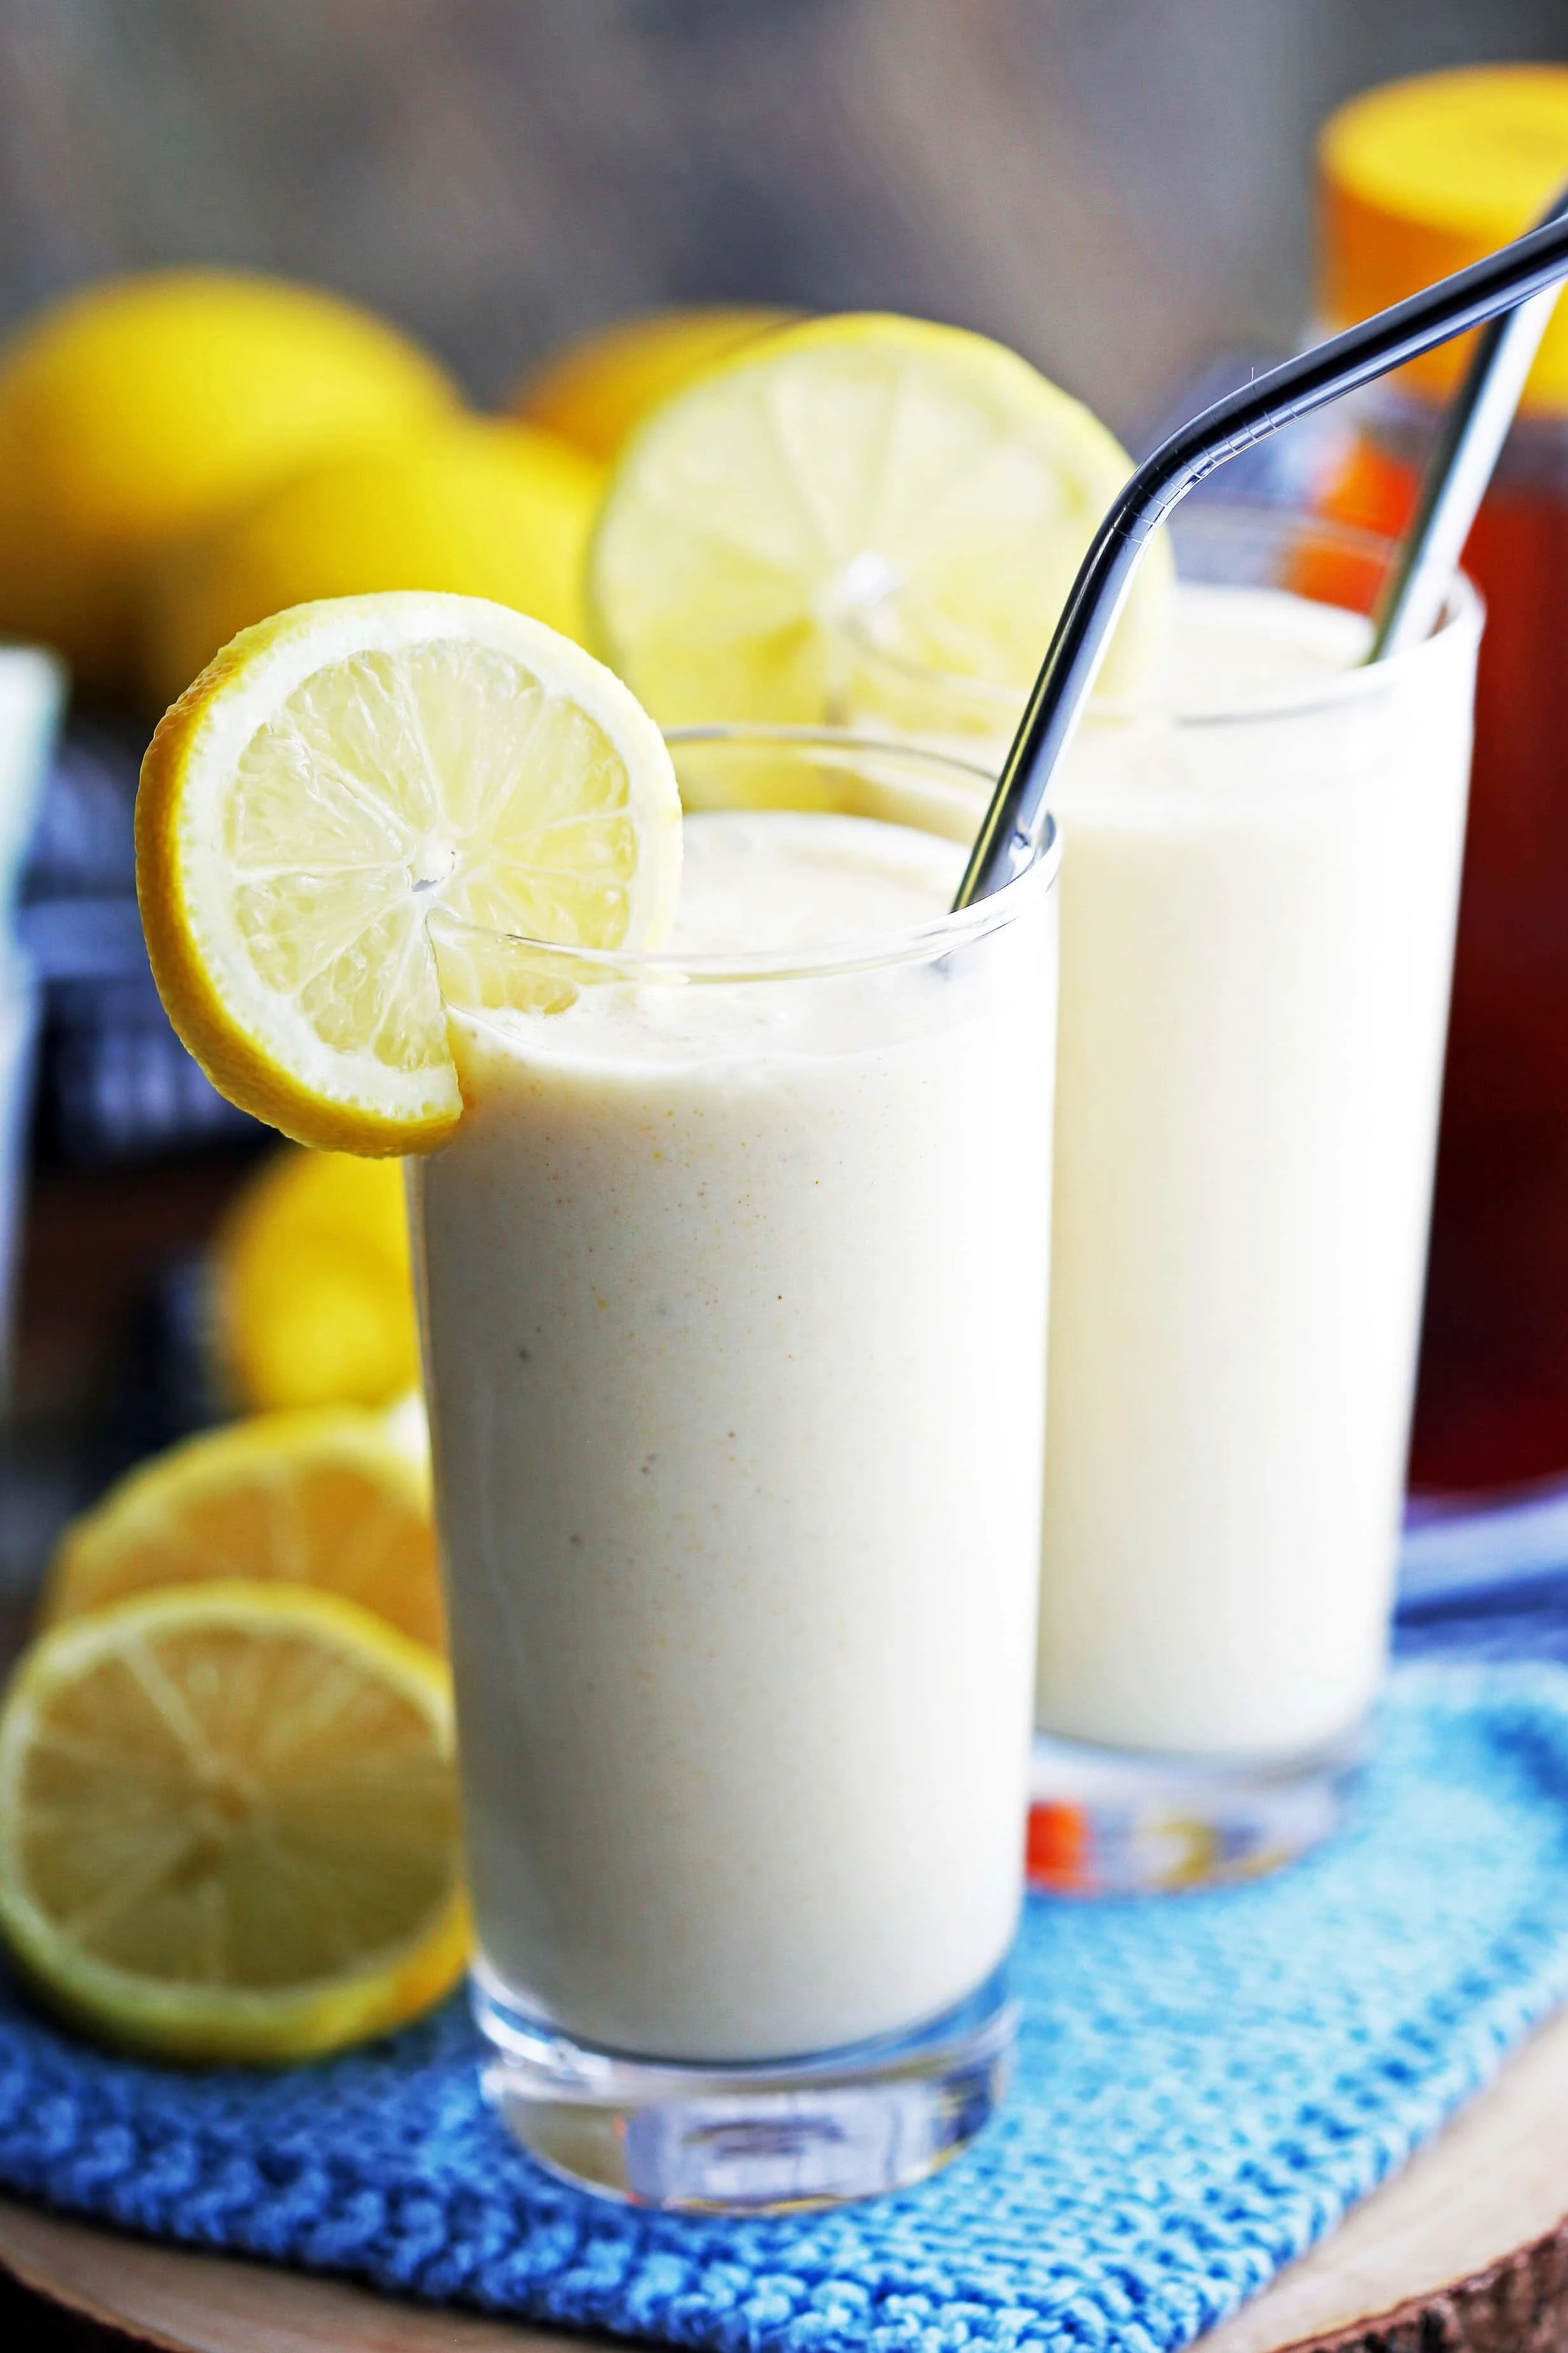 Lemon Pineapple Smoothie drinks in tall glasses with metal straws and lemon slices on the rim.